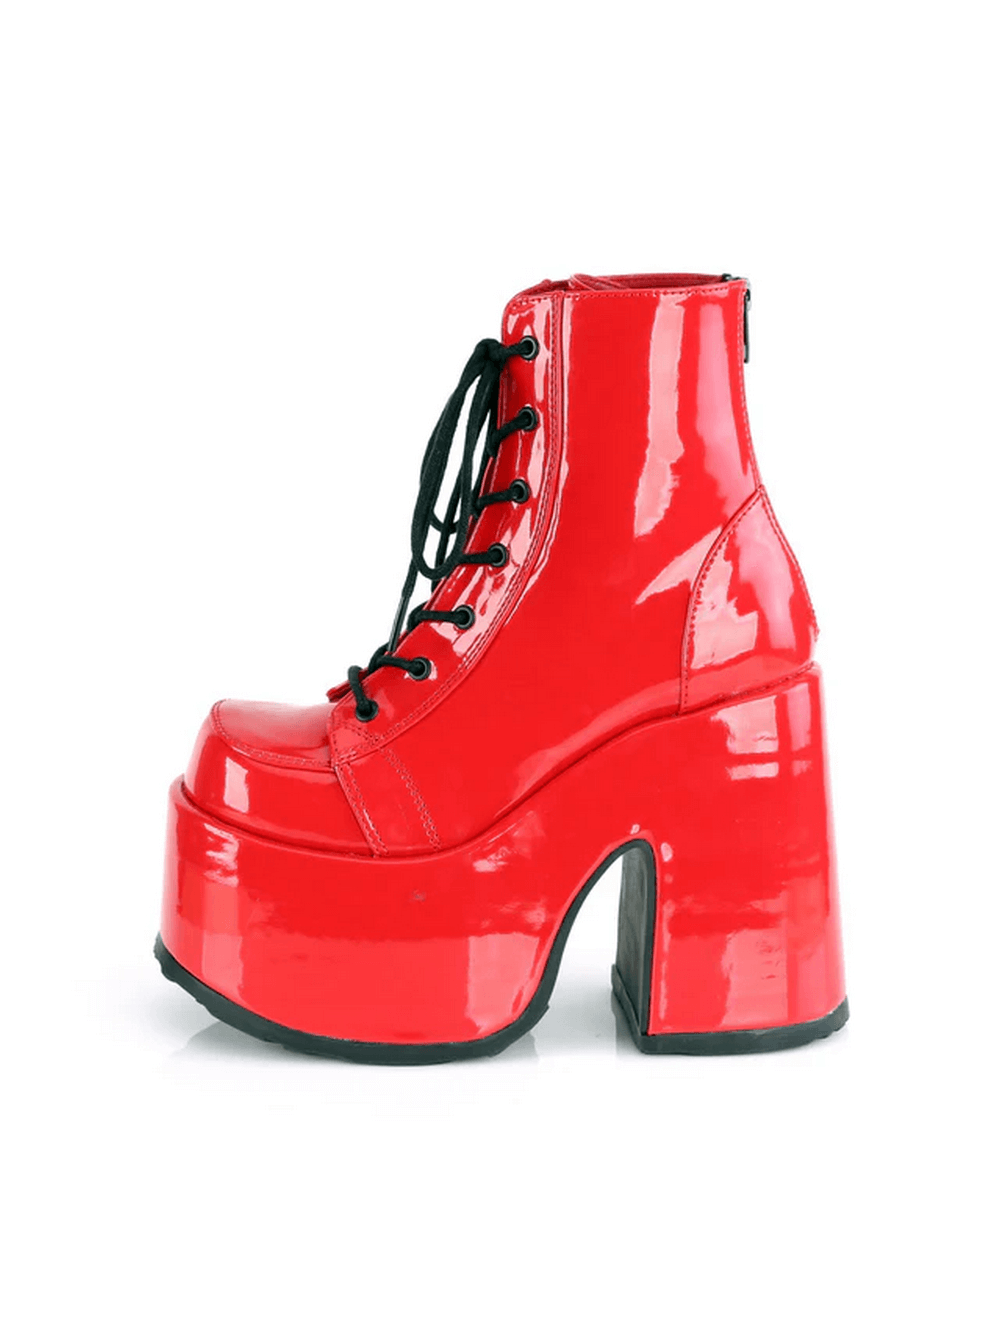 DEMONIA Red Ankle Platform Boots for Bold Statements